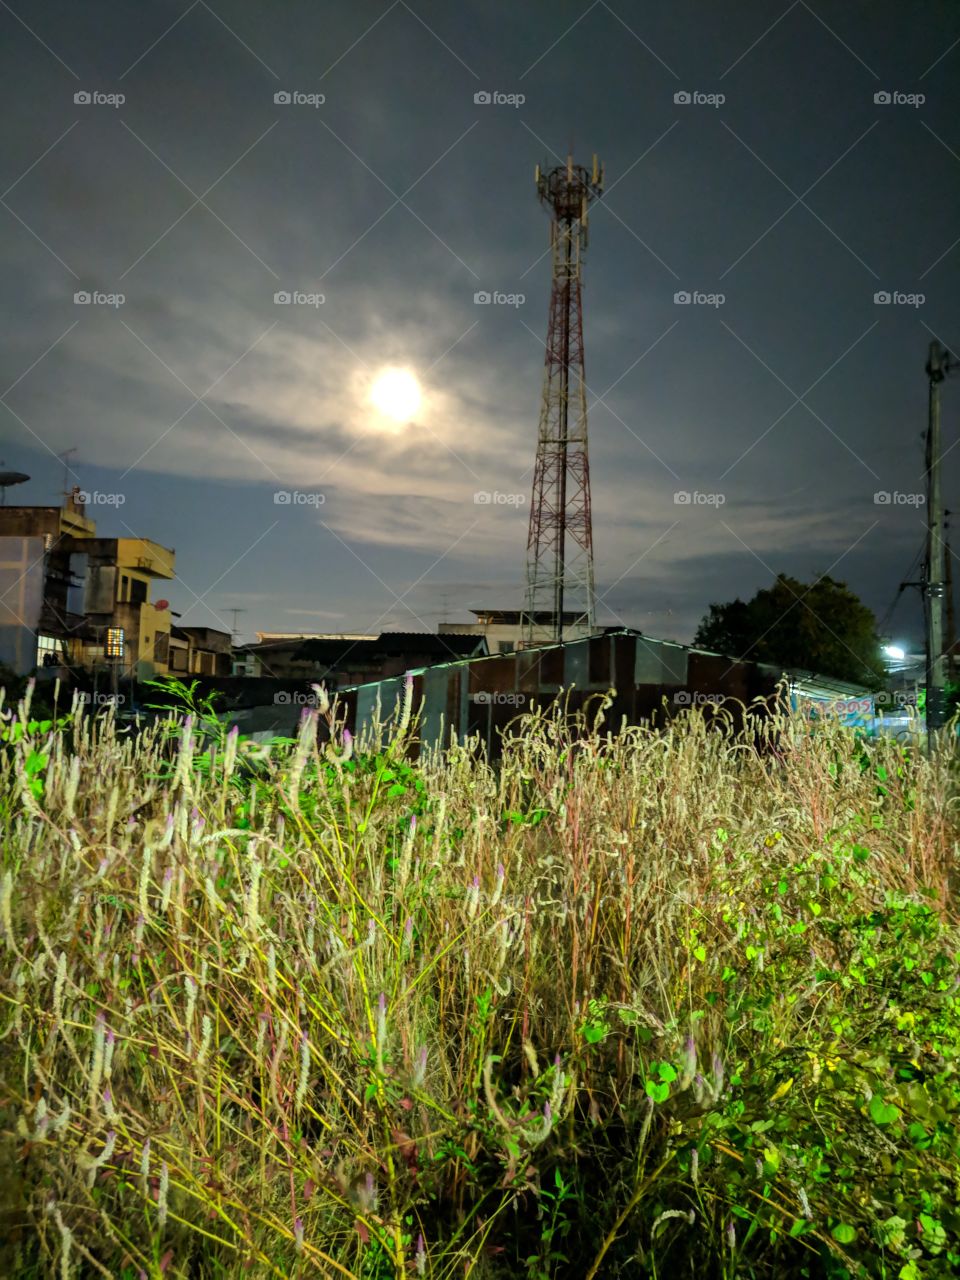 Full moon with grasses in the night. Mobile pole contrast with the sky.